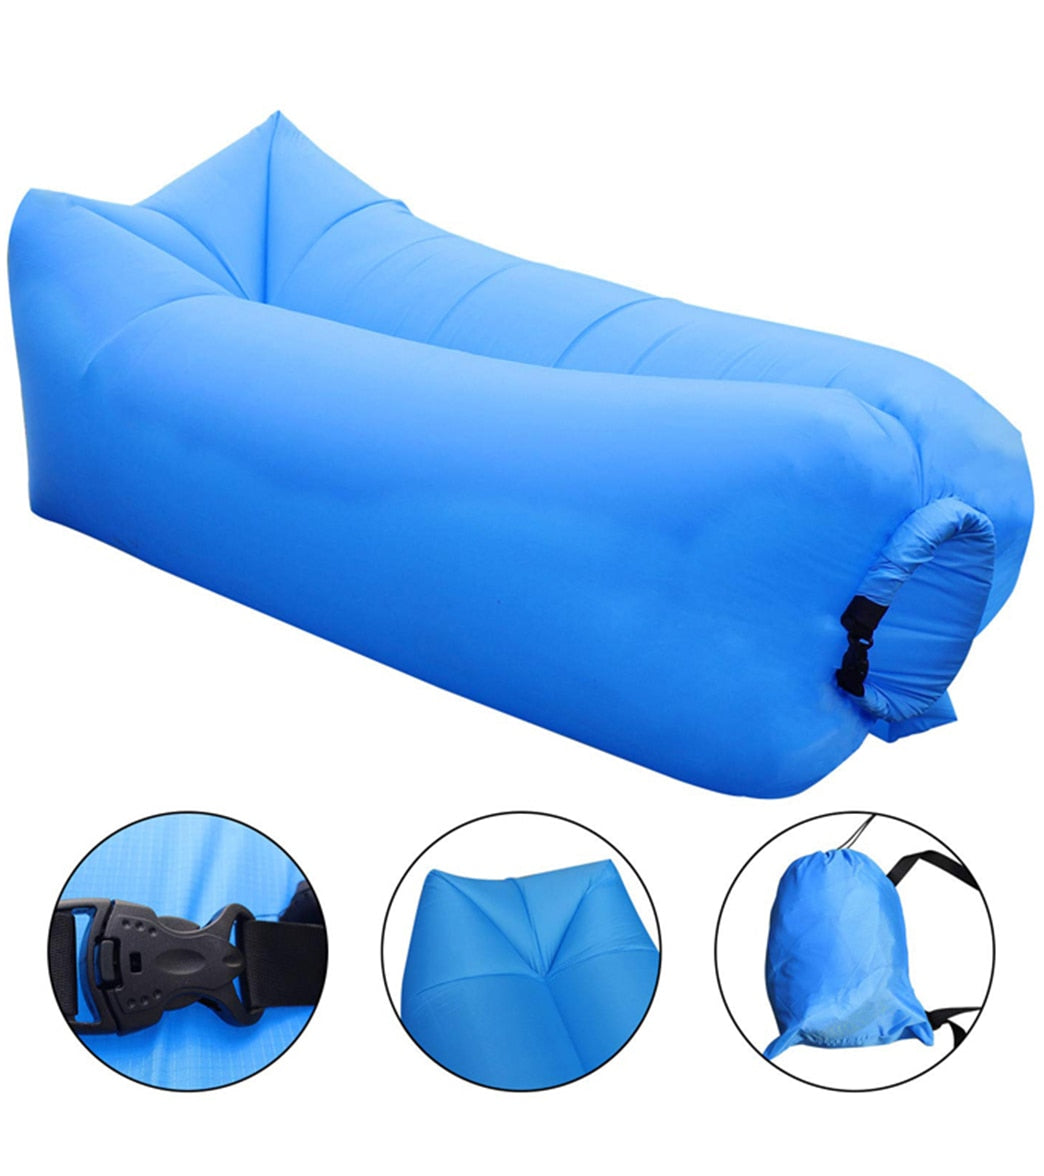 Clubswim Inflatable Tpu Pool Float Lounger 94 Multi Color - Swimoutlet.com